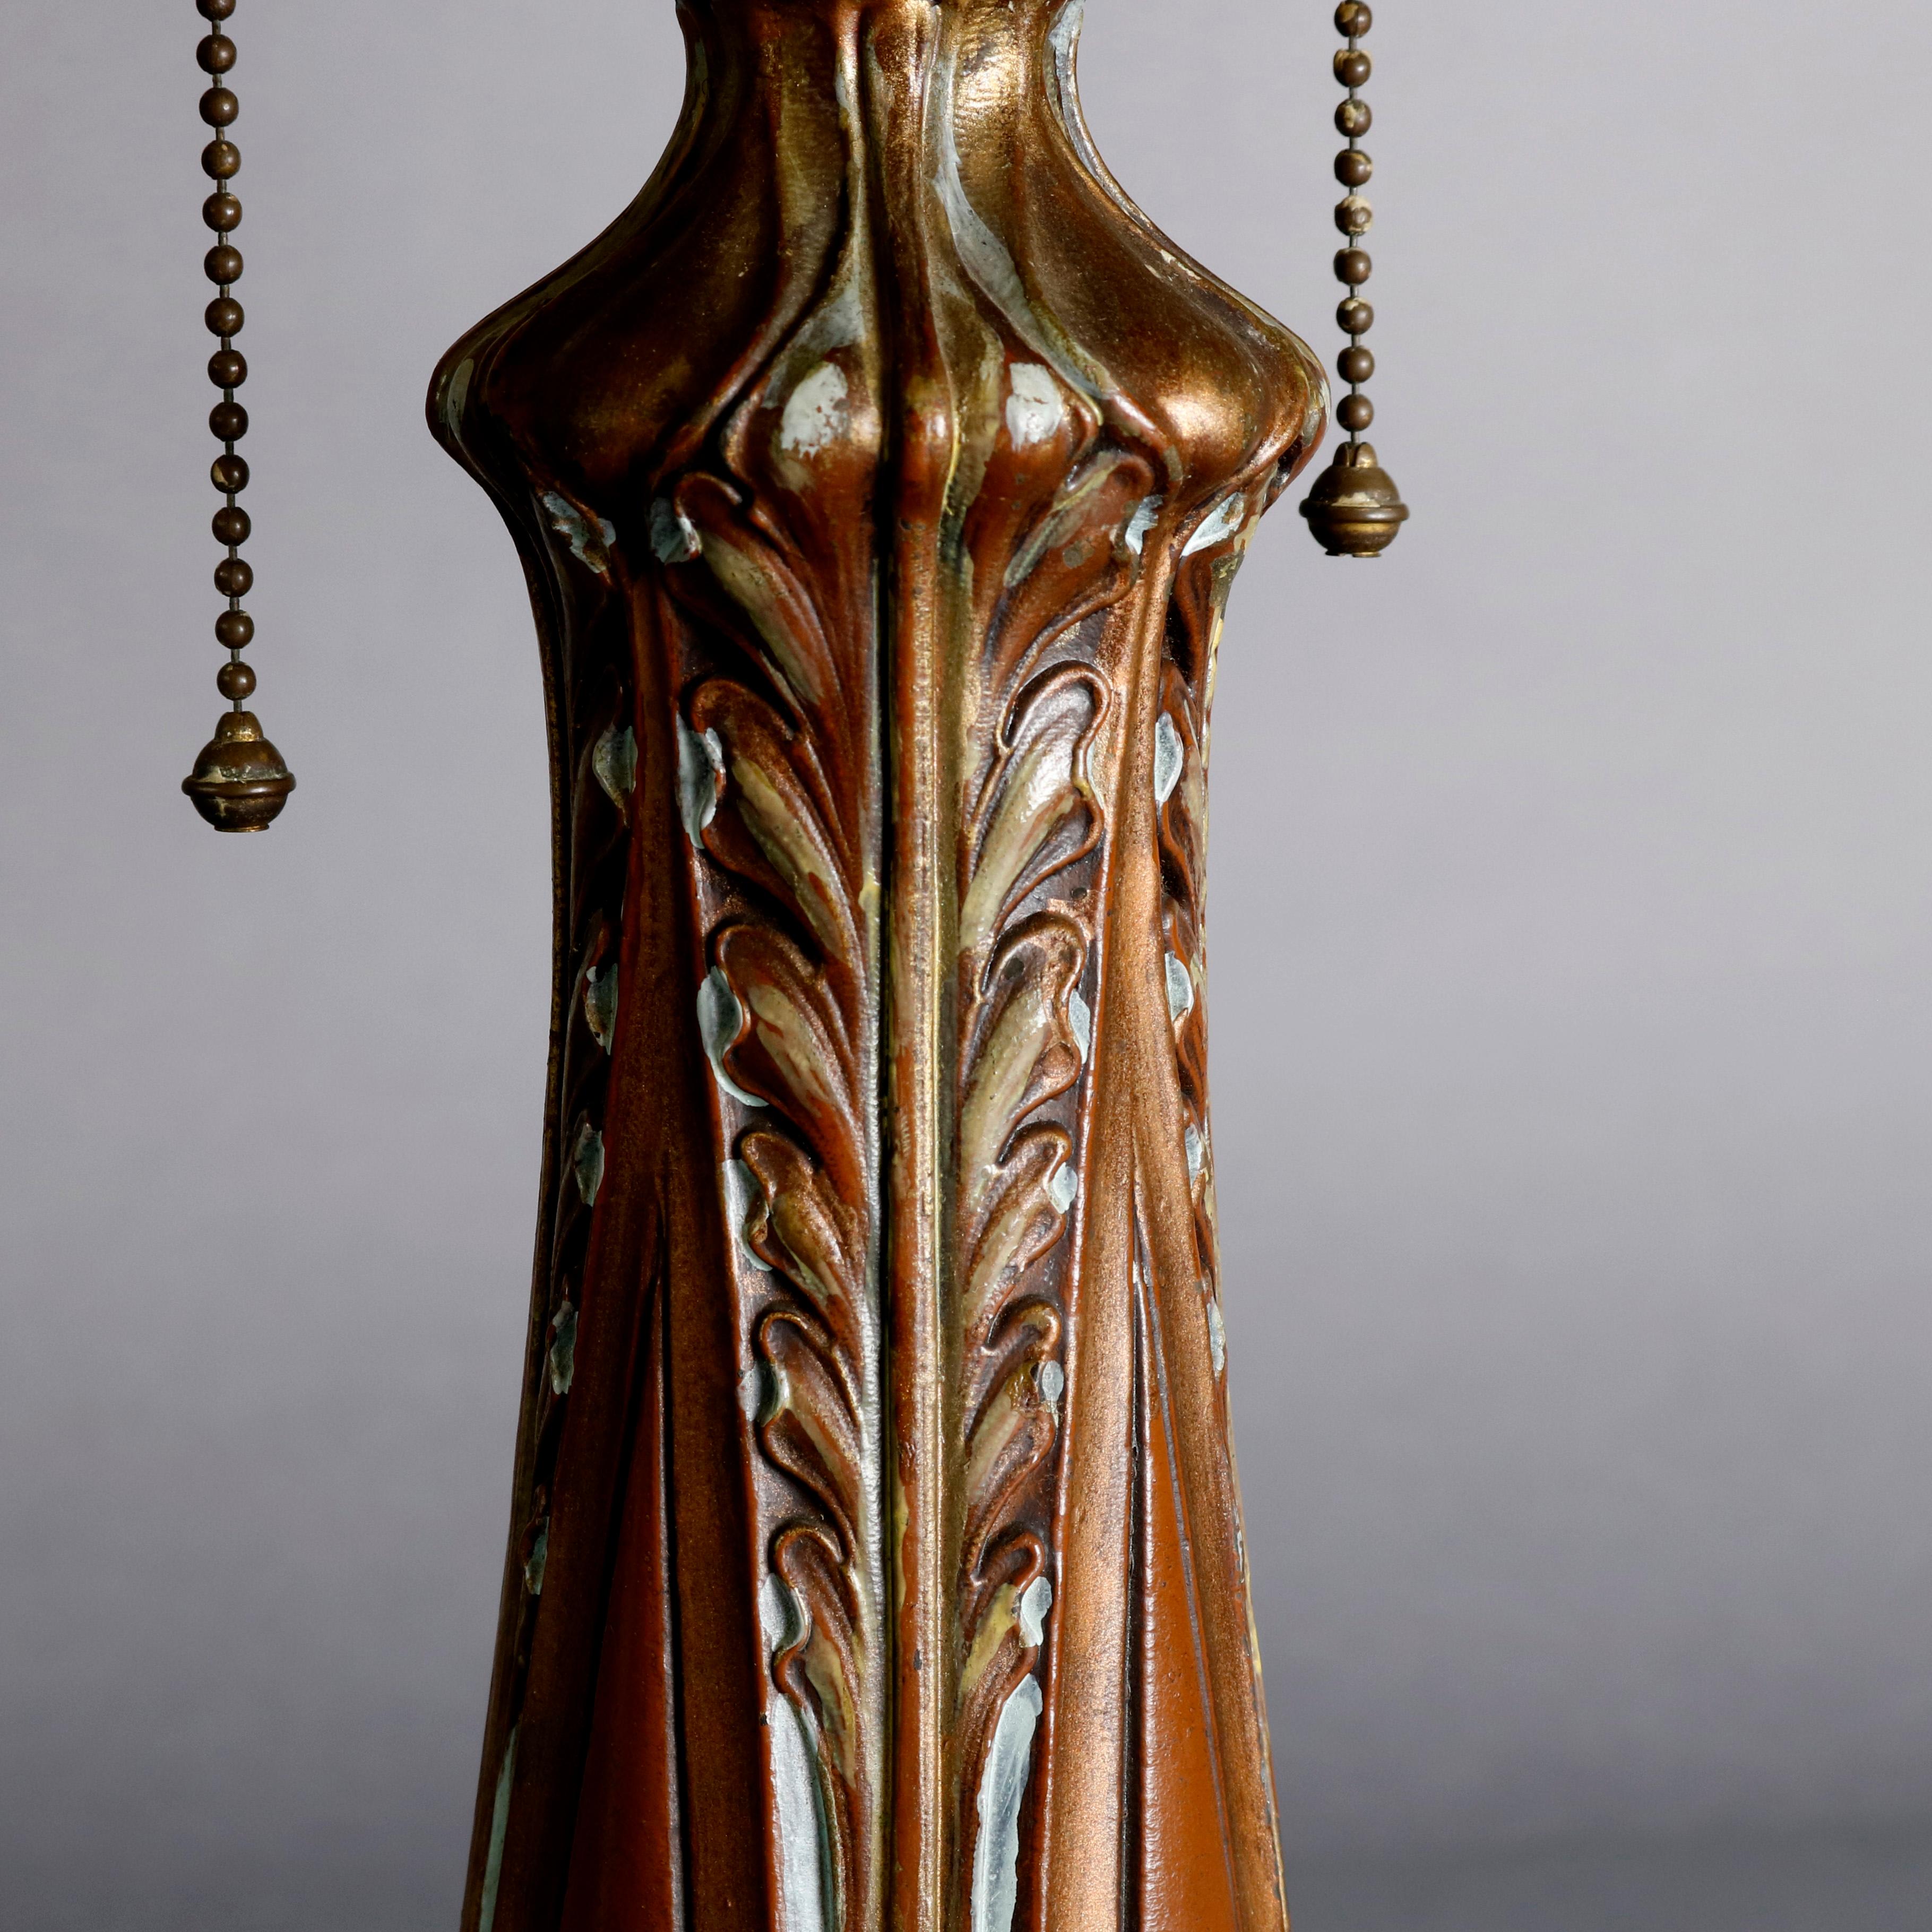 An antique Arts & Crafts Bradley and Hubbard School table lamp offers stylized foliate cast base with two sockets surmounted by six panel bent slag glass shade with cast frame having pierced design reminiscent of art deco, circa 1920

Measures: